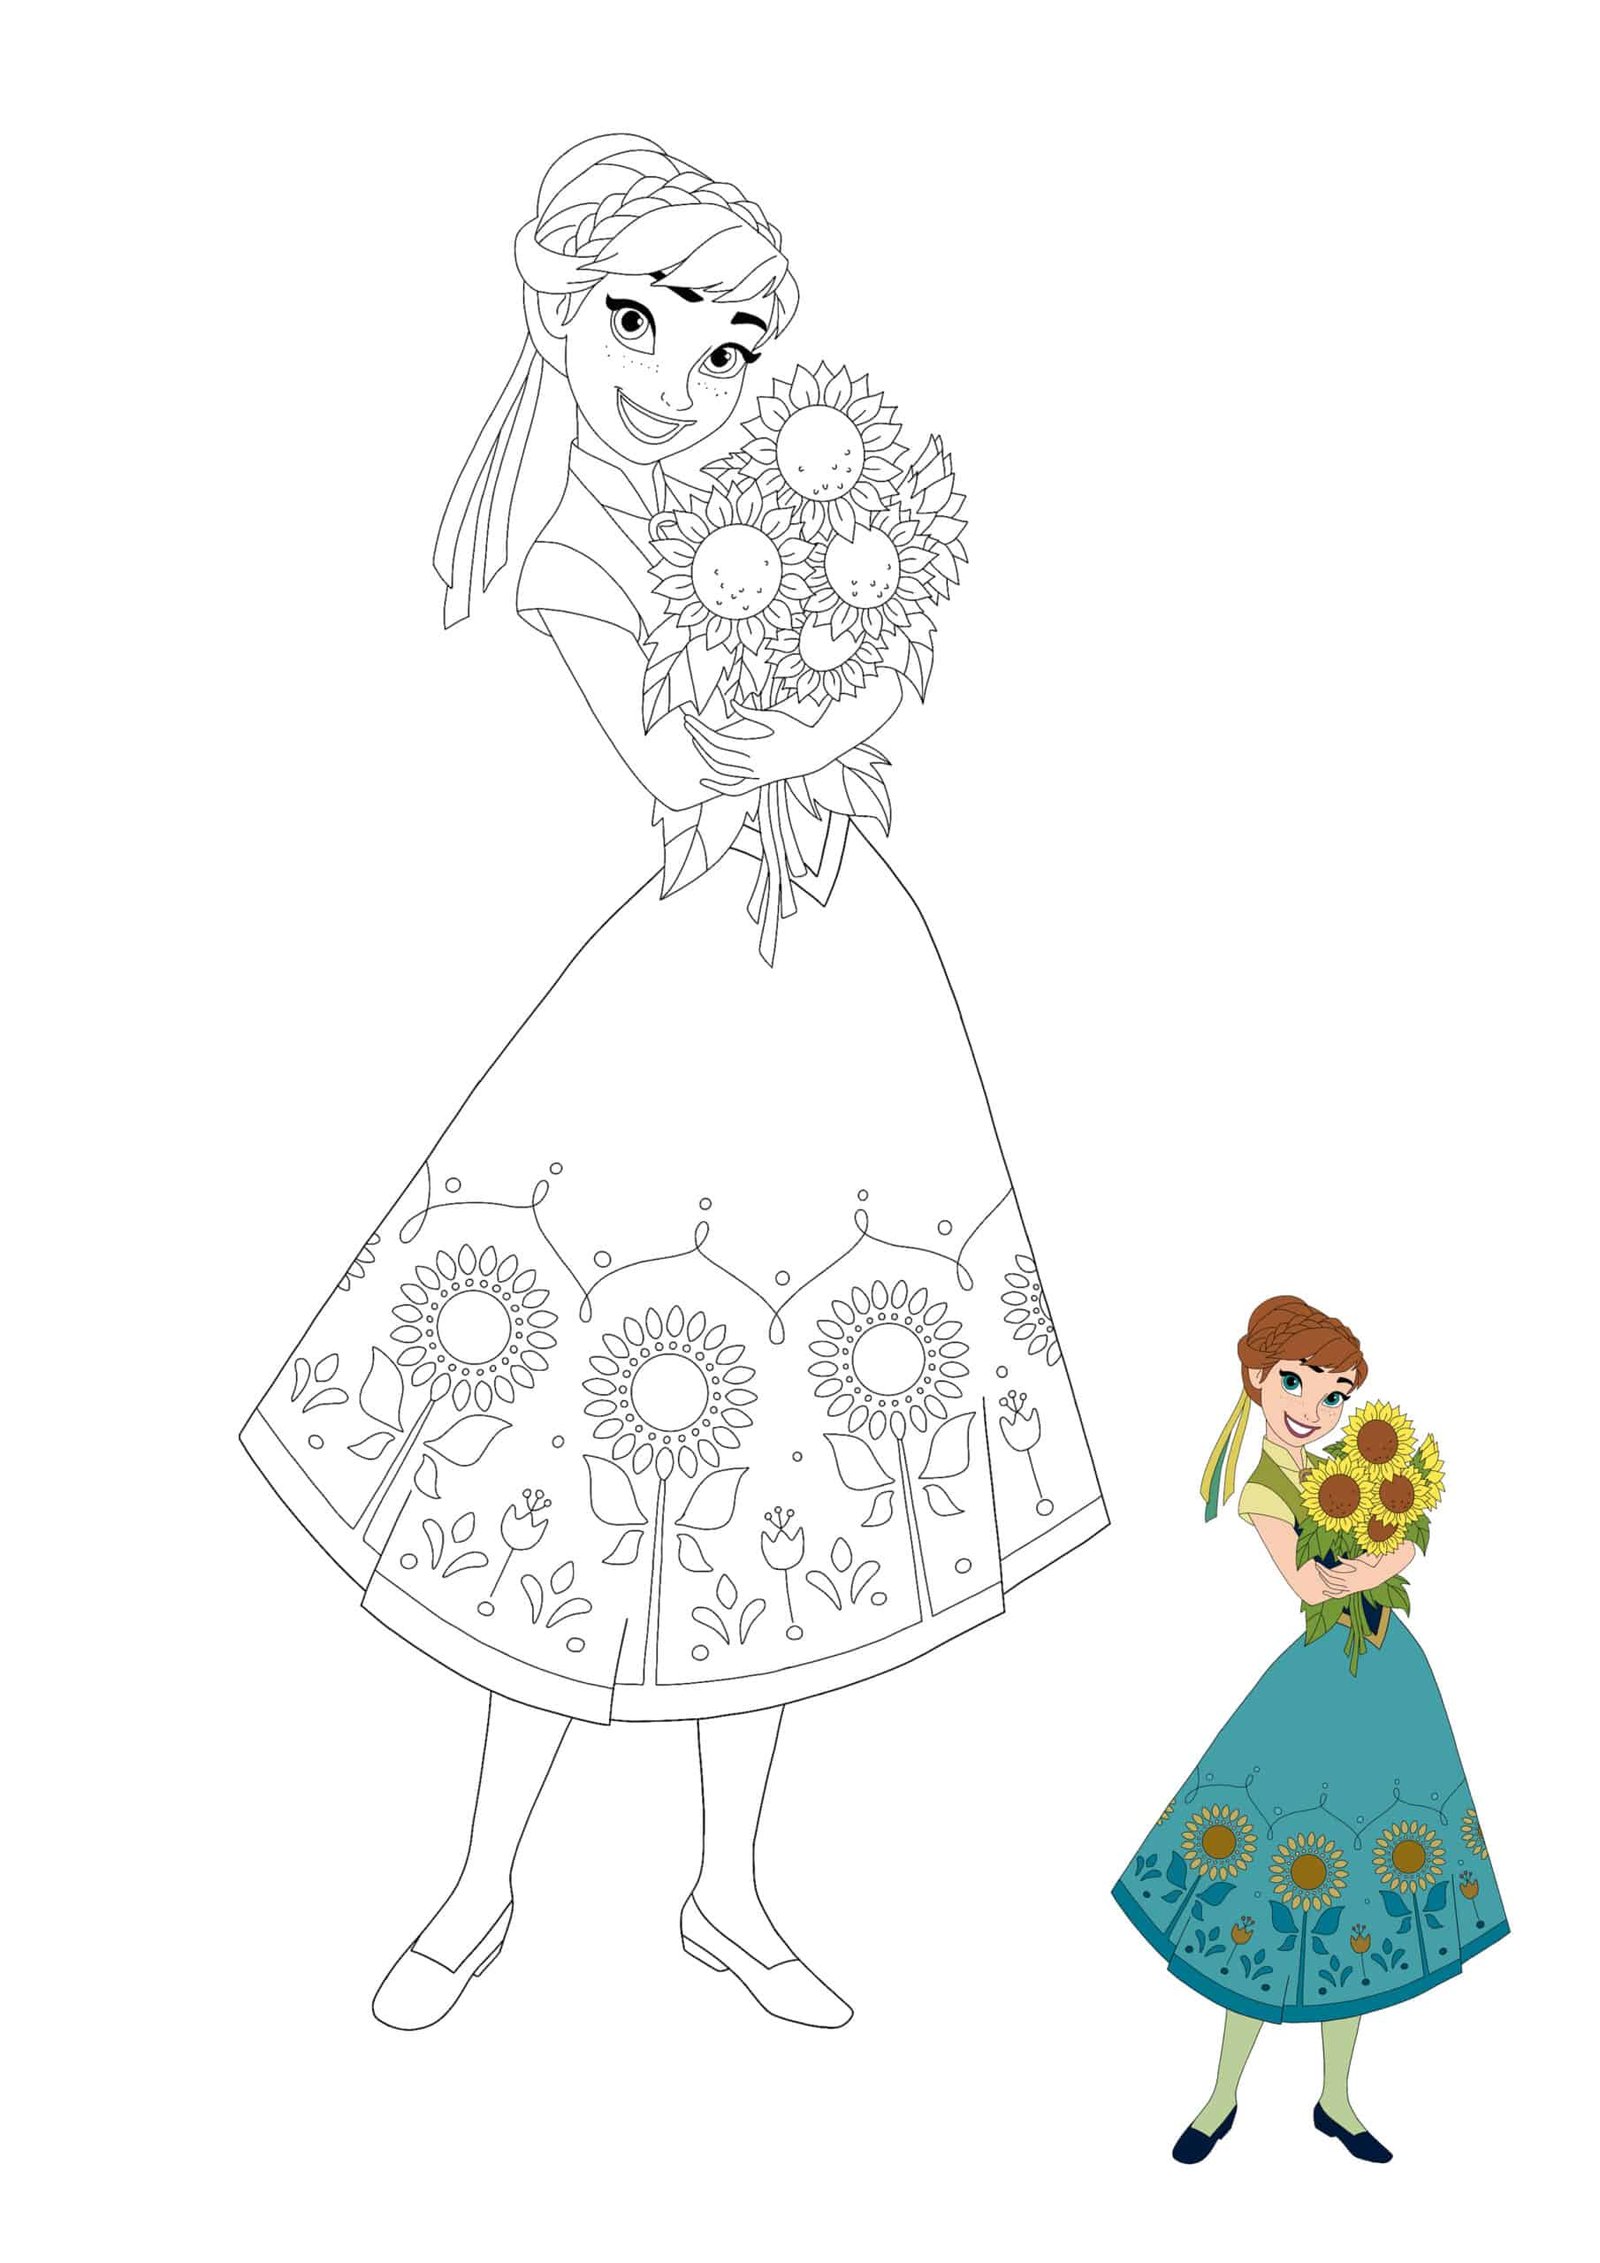 Princess Anna from Frozen with Sunflowers coloring page